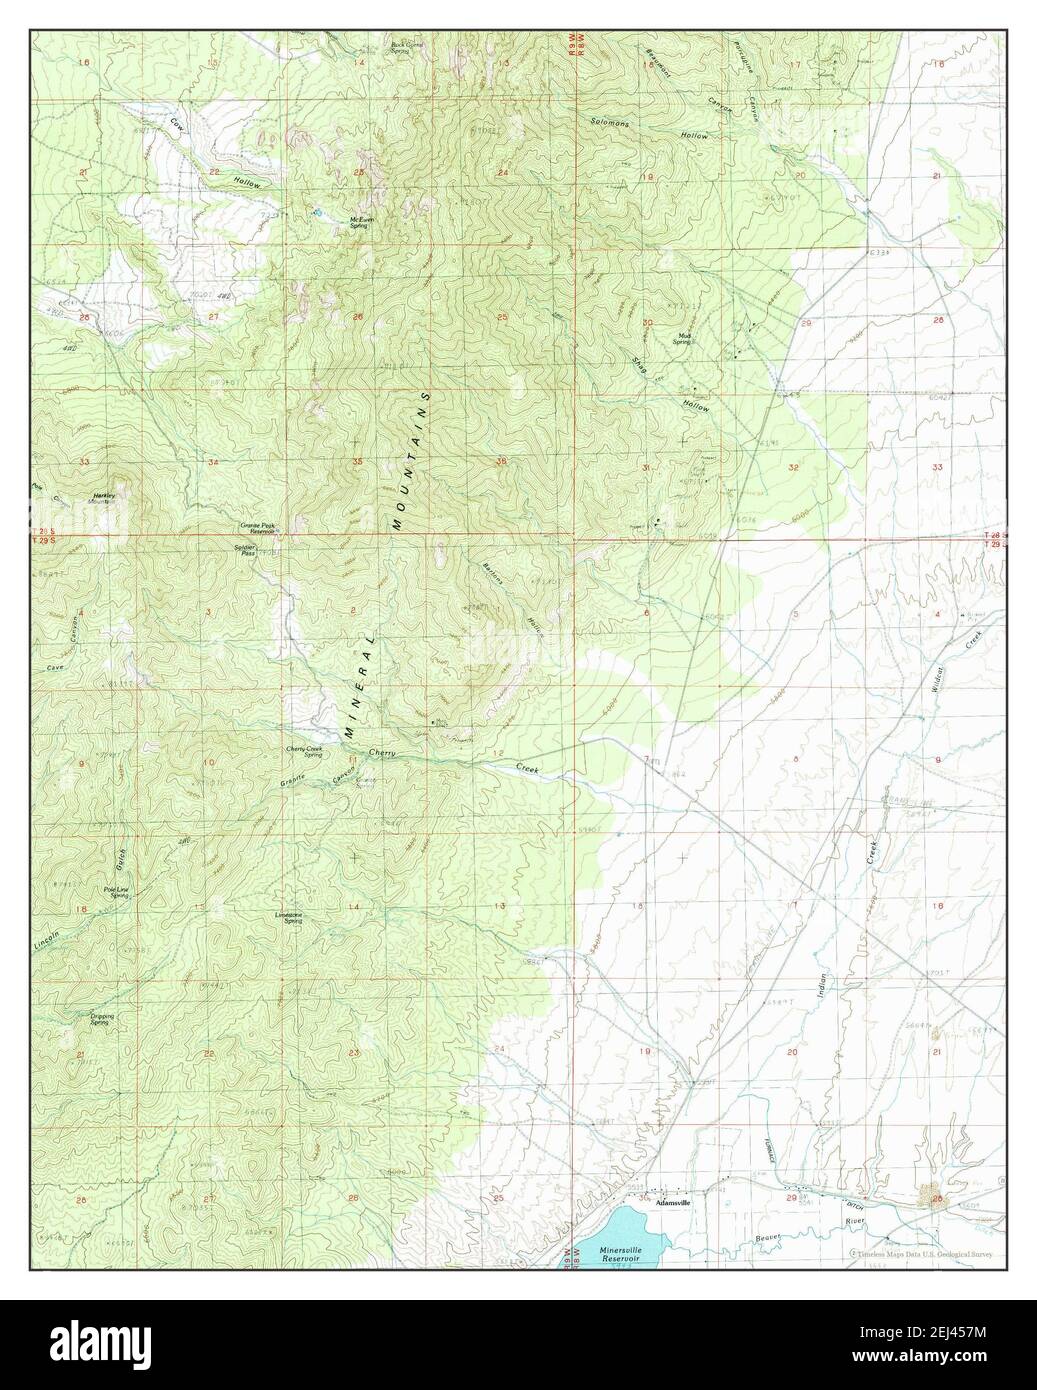 Adamsville, Utah, map 1986, 1:24000, United States of America by Timeless Maps, data U.S. Geological Survey Stock Photo